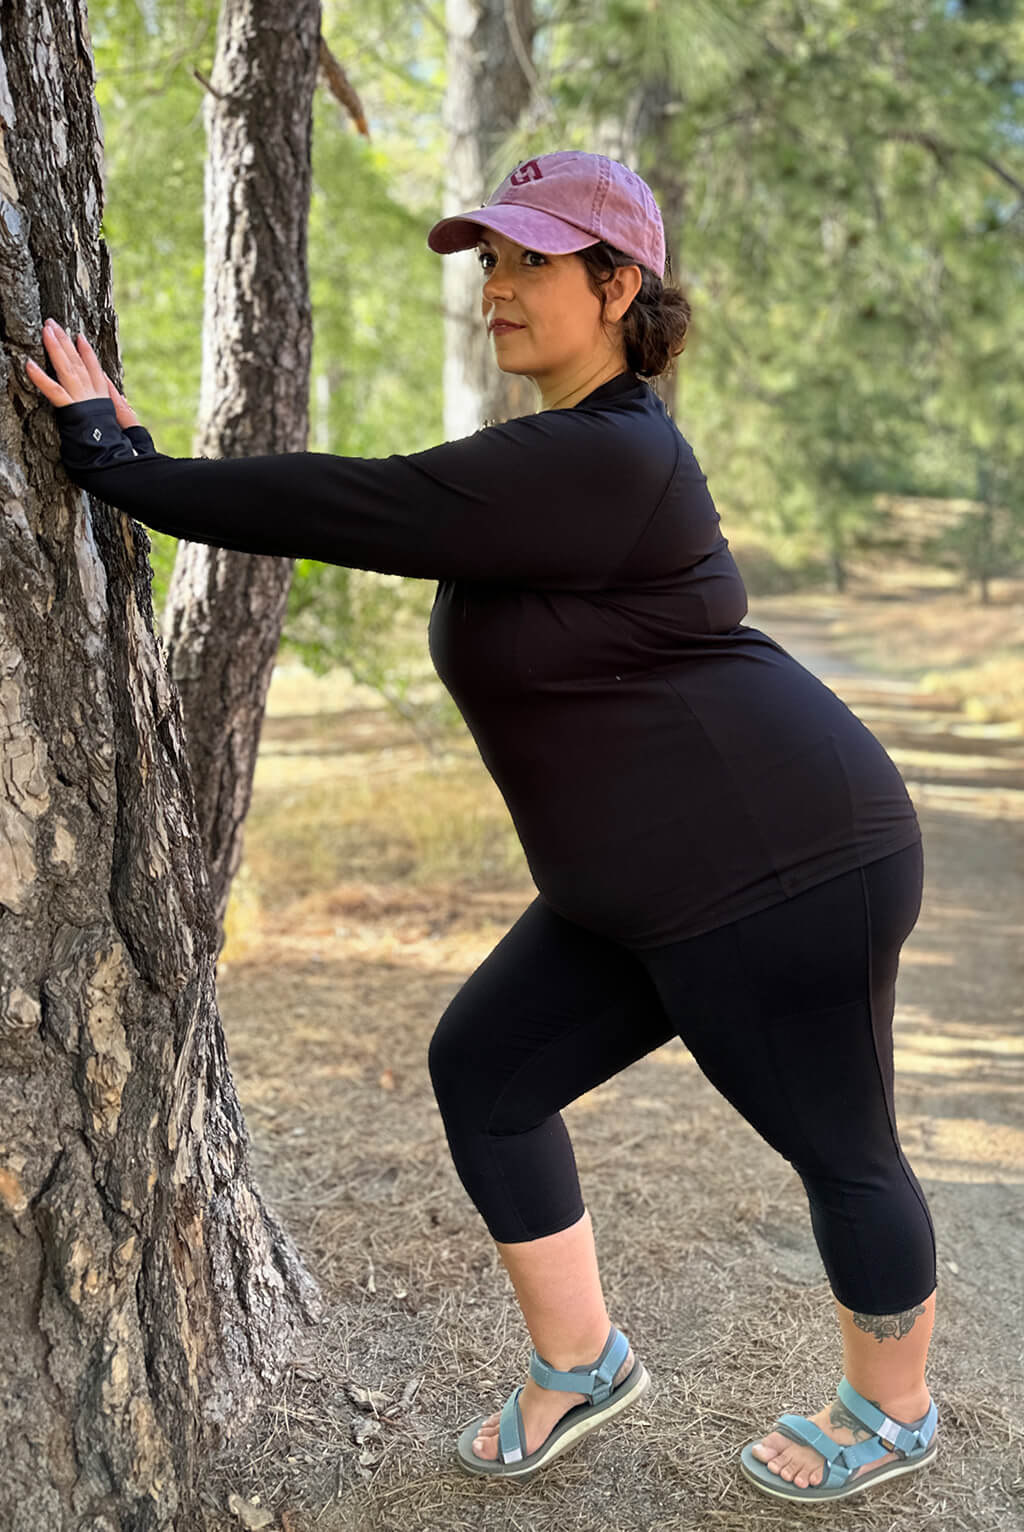 Plus size model stretches against a tree wearing black long sleeve compression top.